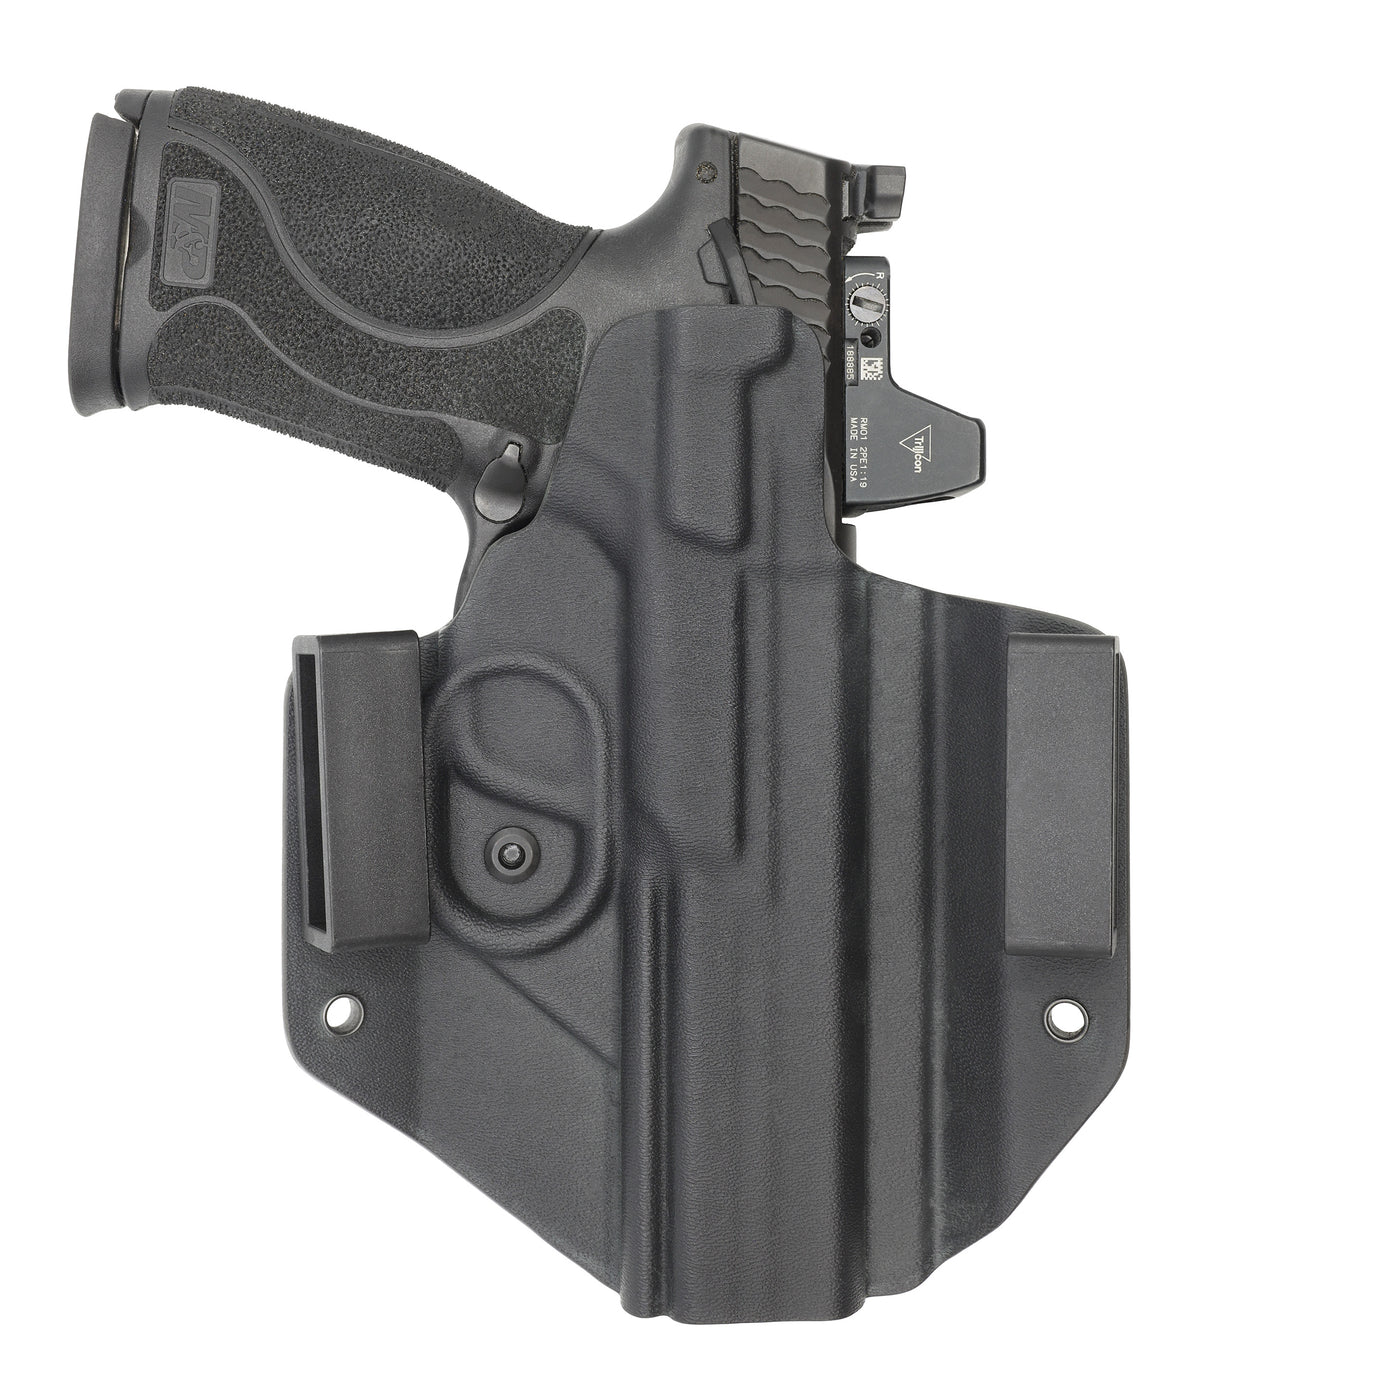 C&G Holsters quickship OWB Covert M&P 10/45 5" LEFT HAND in holstered position back view